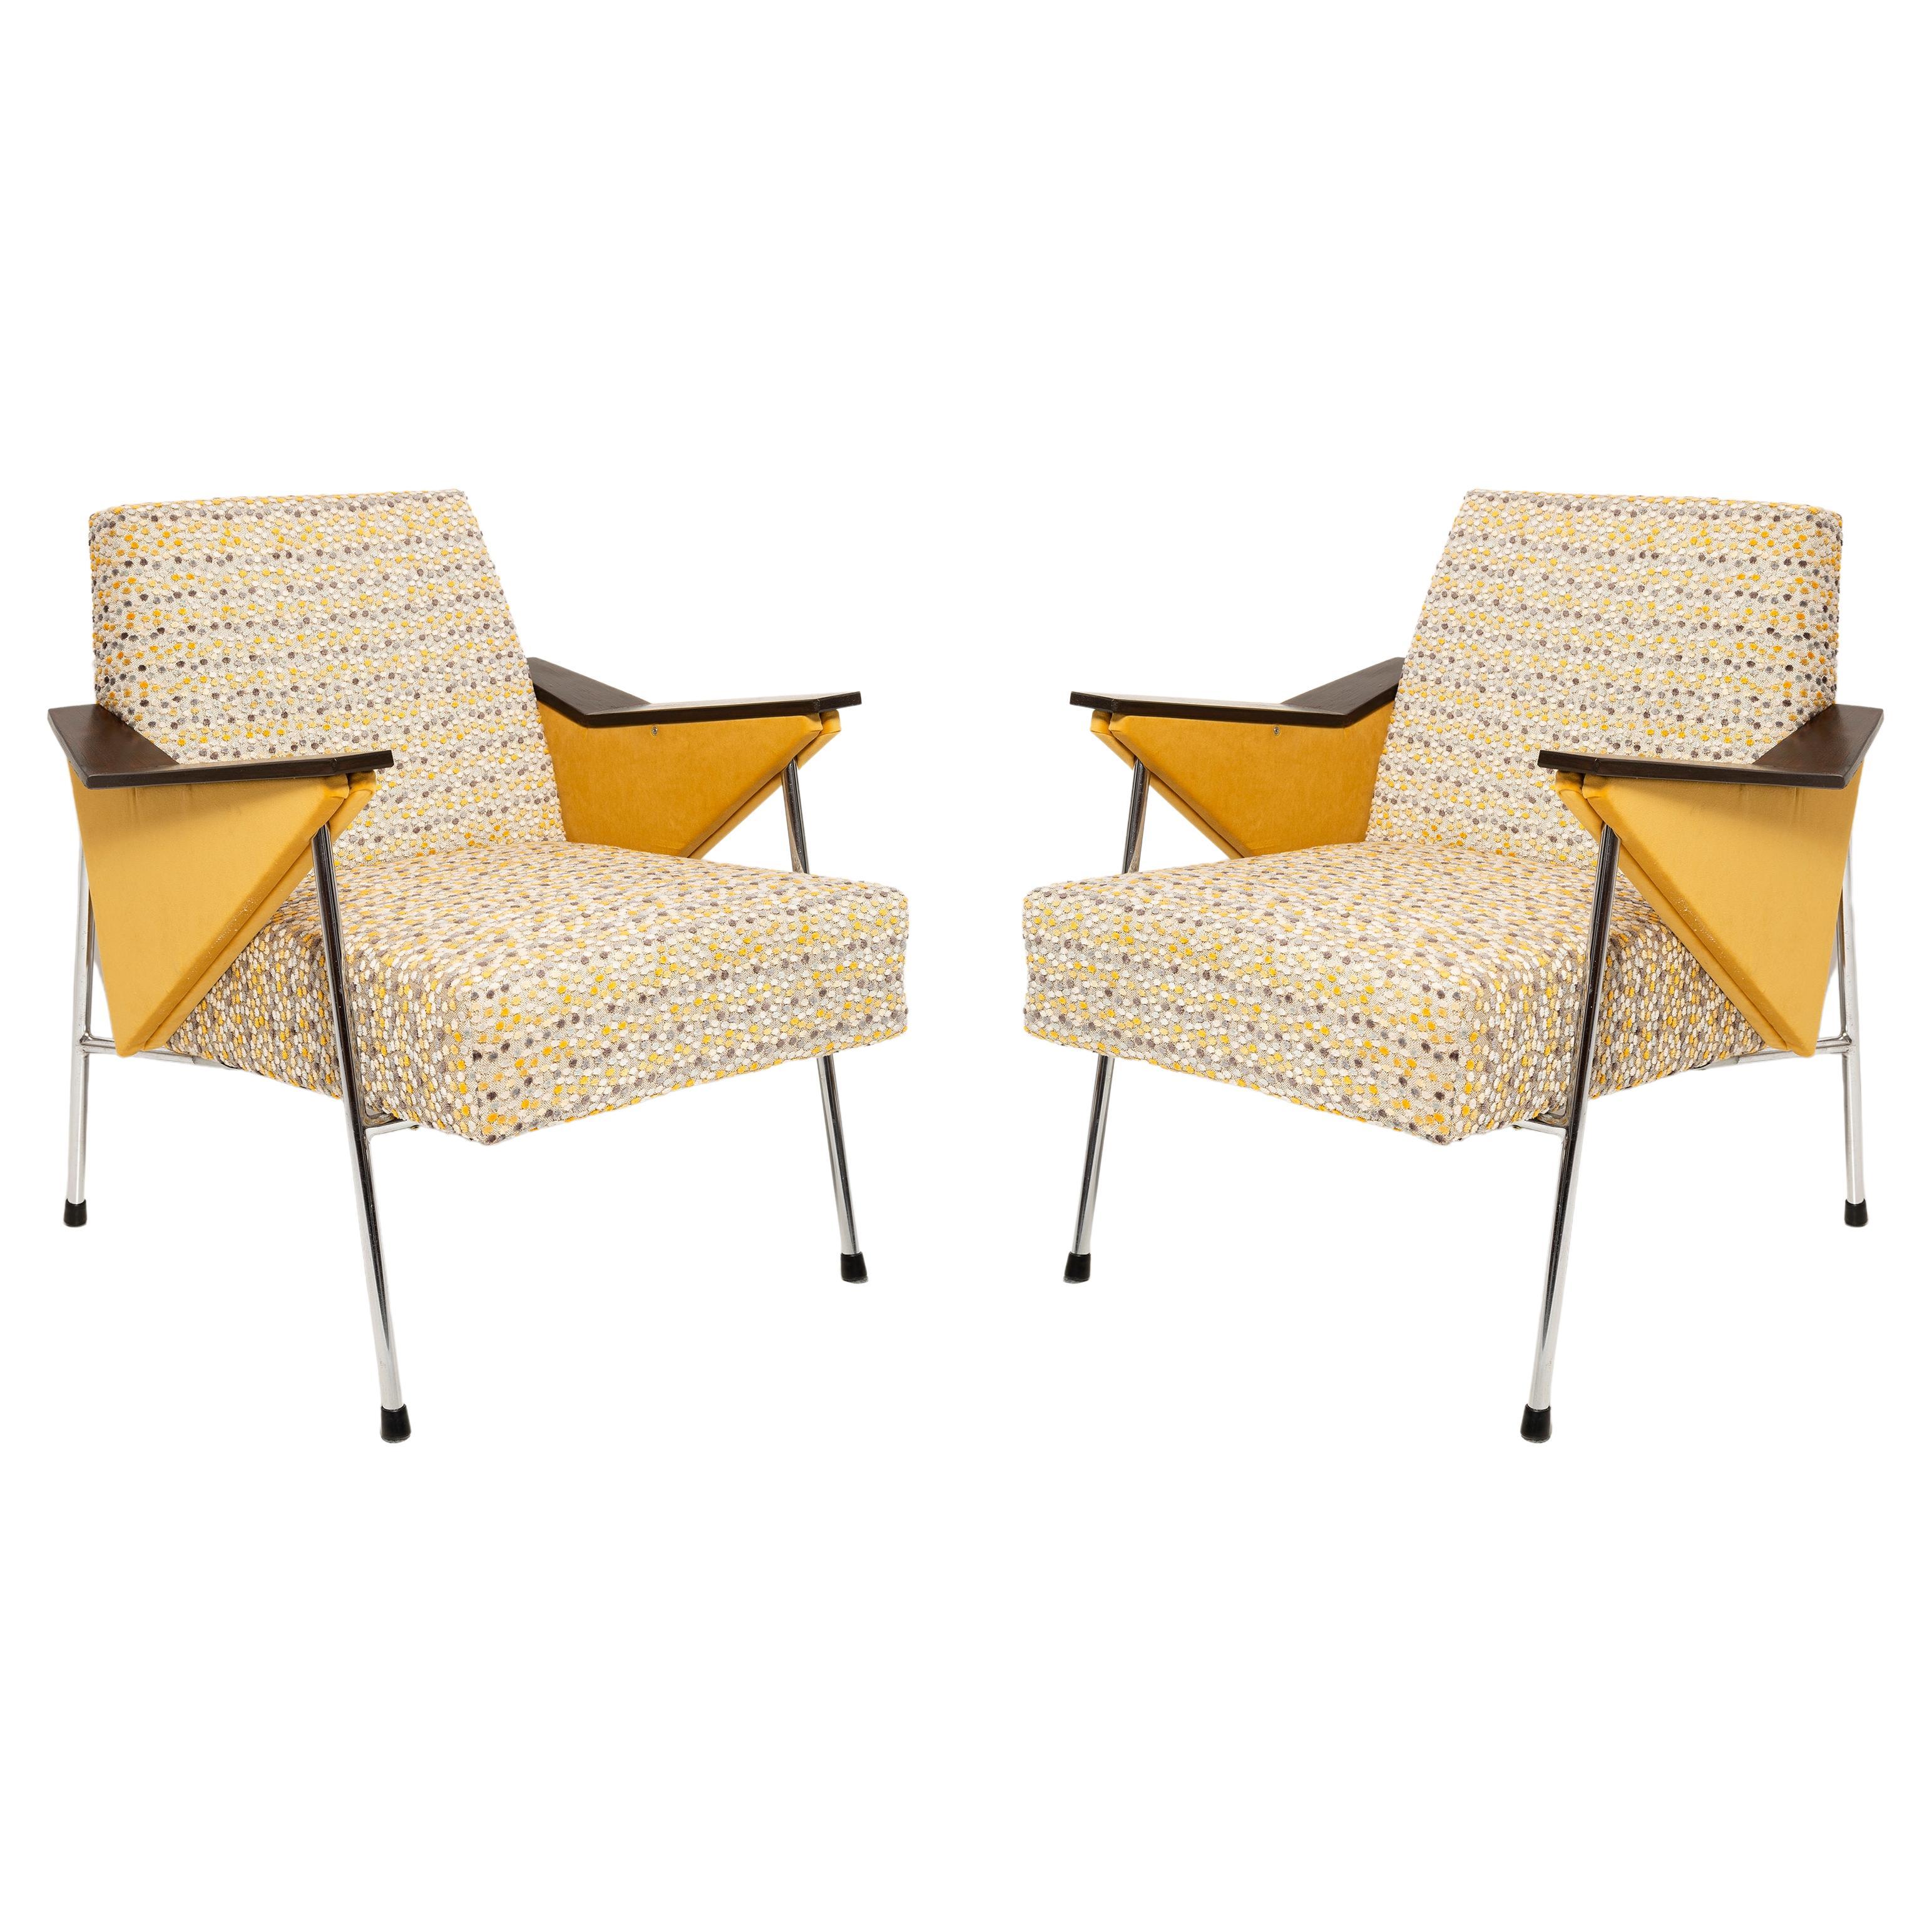 Pair of Mid Century Bat Armchairs, Yellow Dots, Bauhaus Style, Poland, 1970s. For Sale